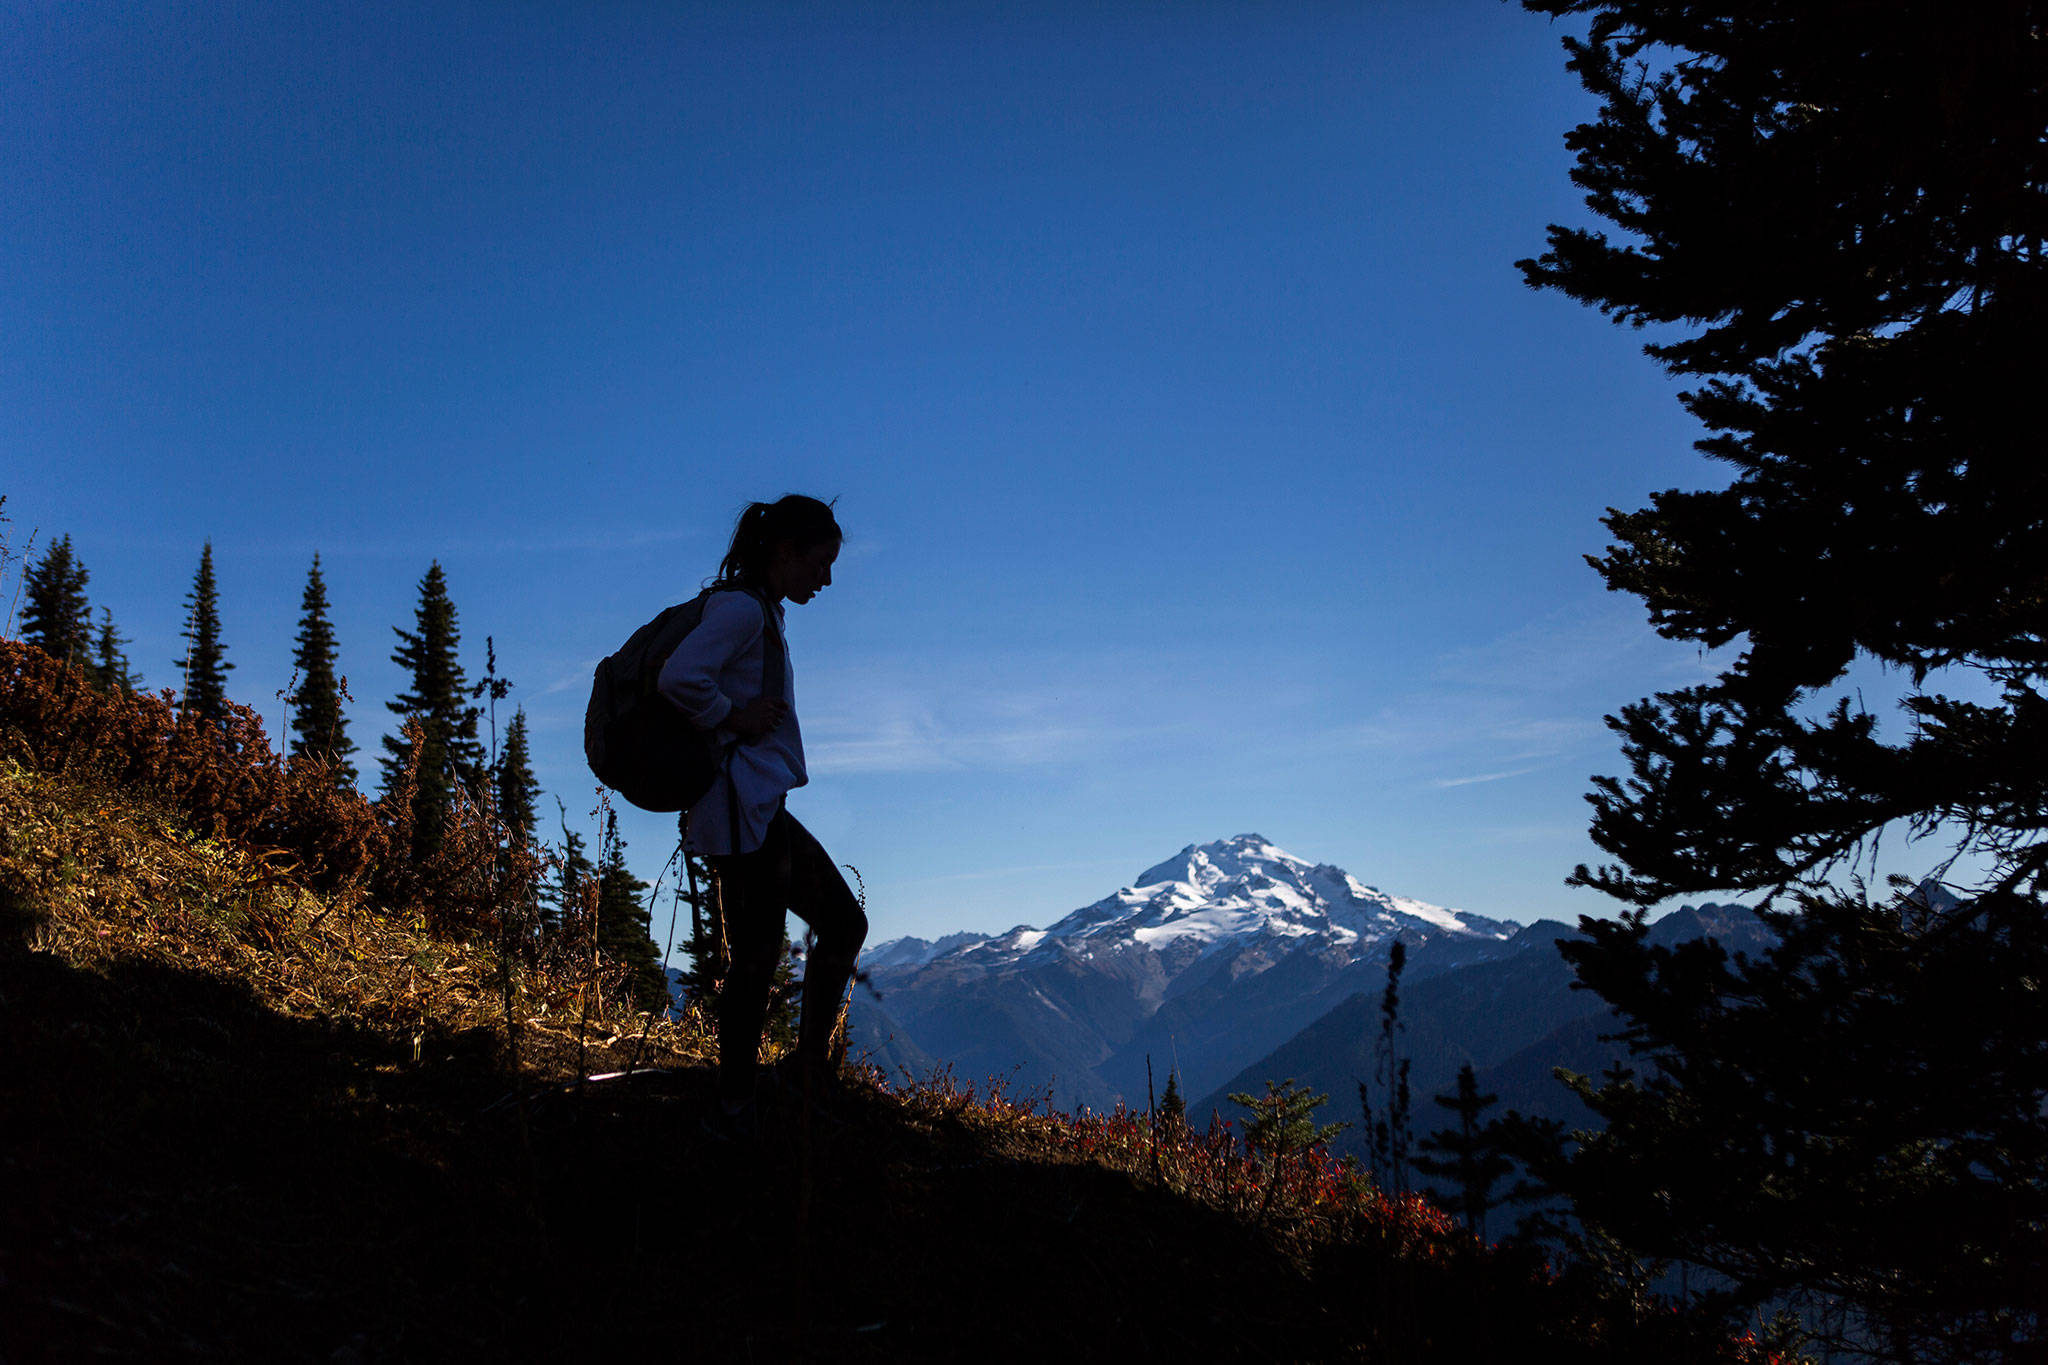 Montana Hawksford takes a break on during a hike to Green Mountain Lookout on Monday, Oct. 15, 2018 in Darrington, Wa. (Olivia Vanni / The Herald)